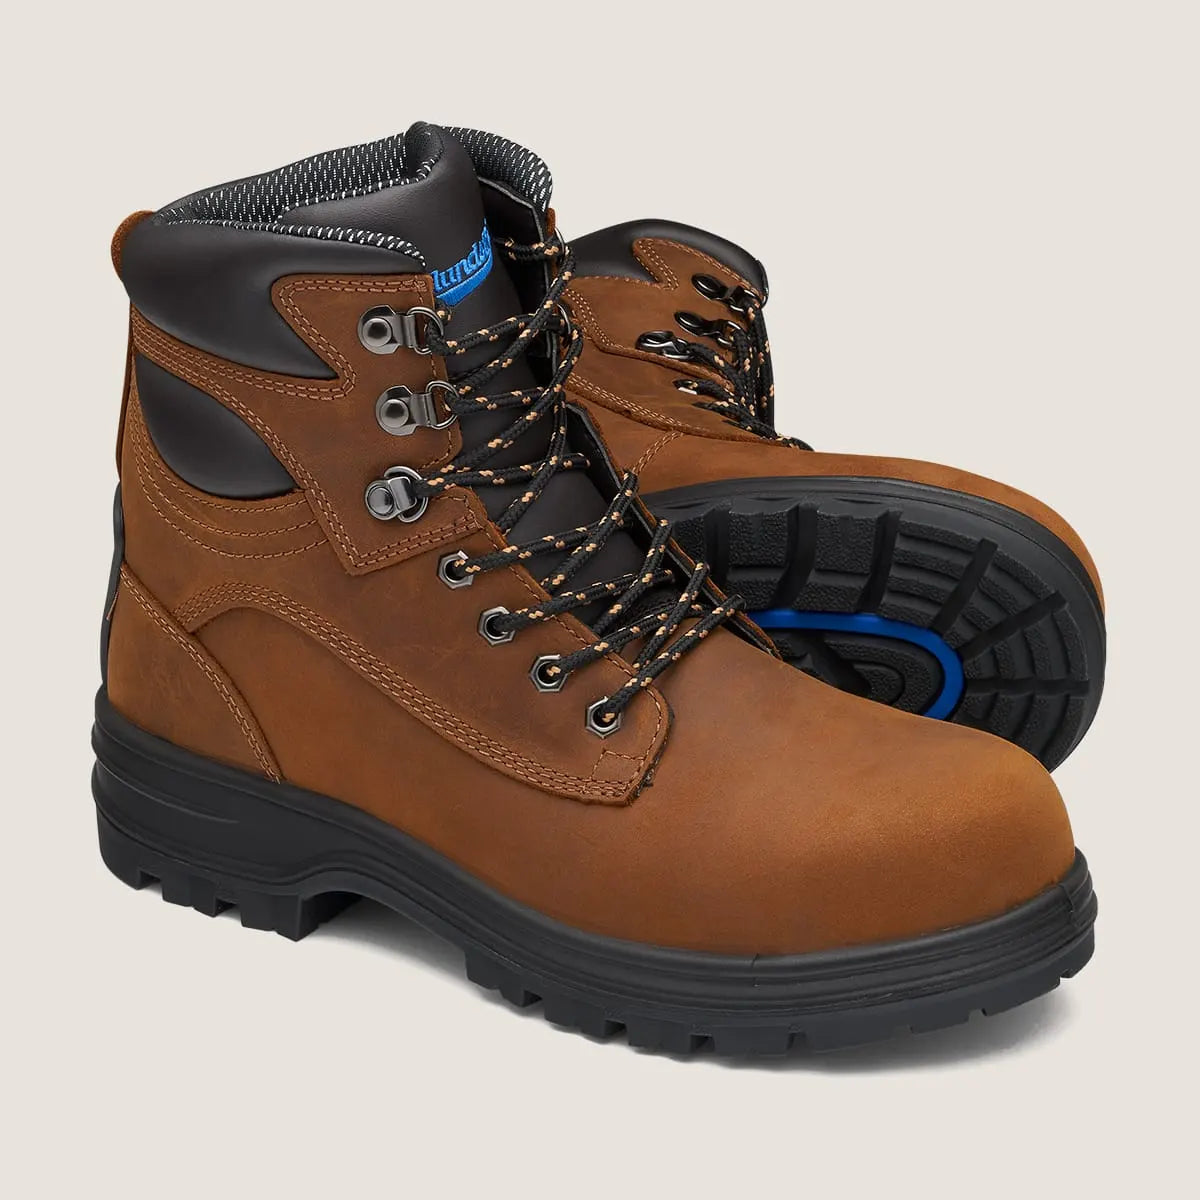 Blundstone 143 Lace Up Safety Boots in Crazy Horse